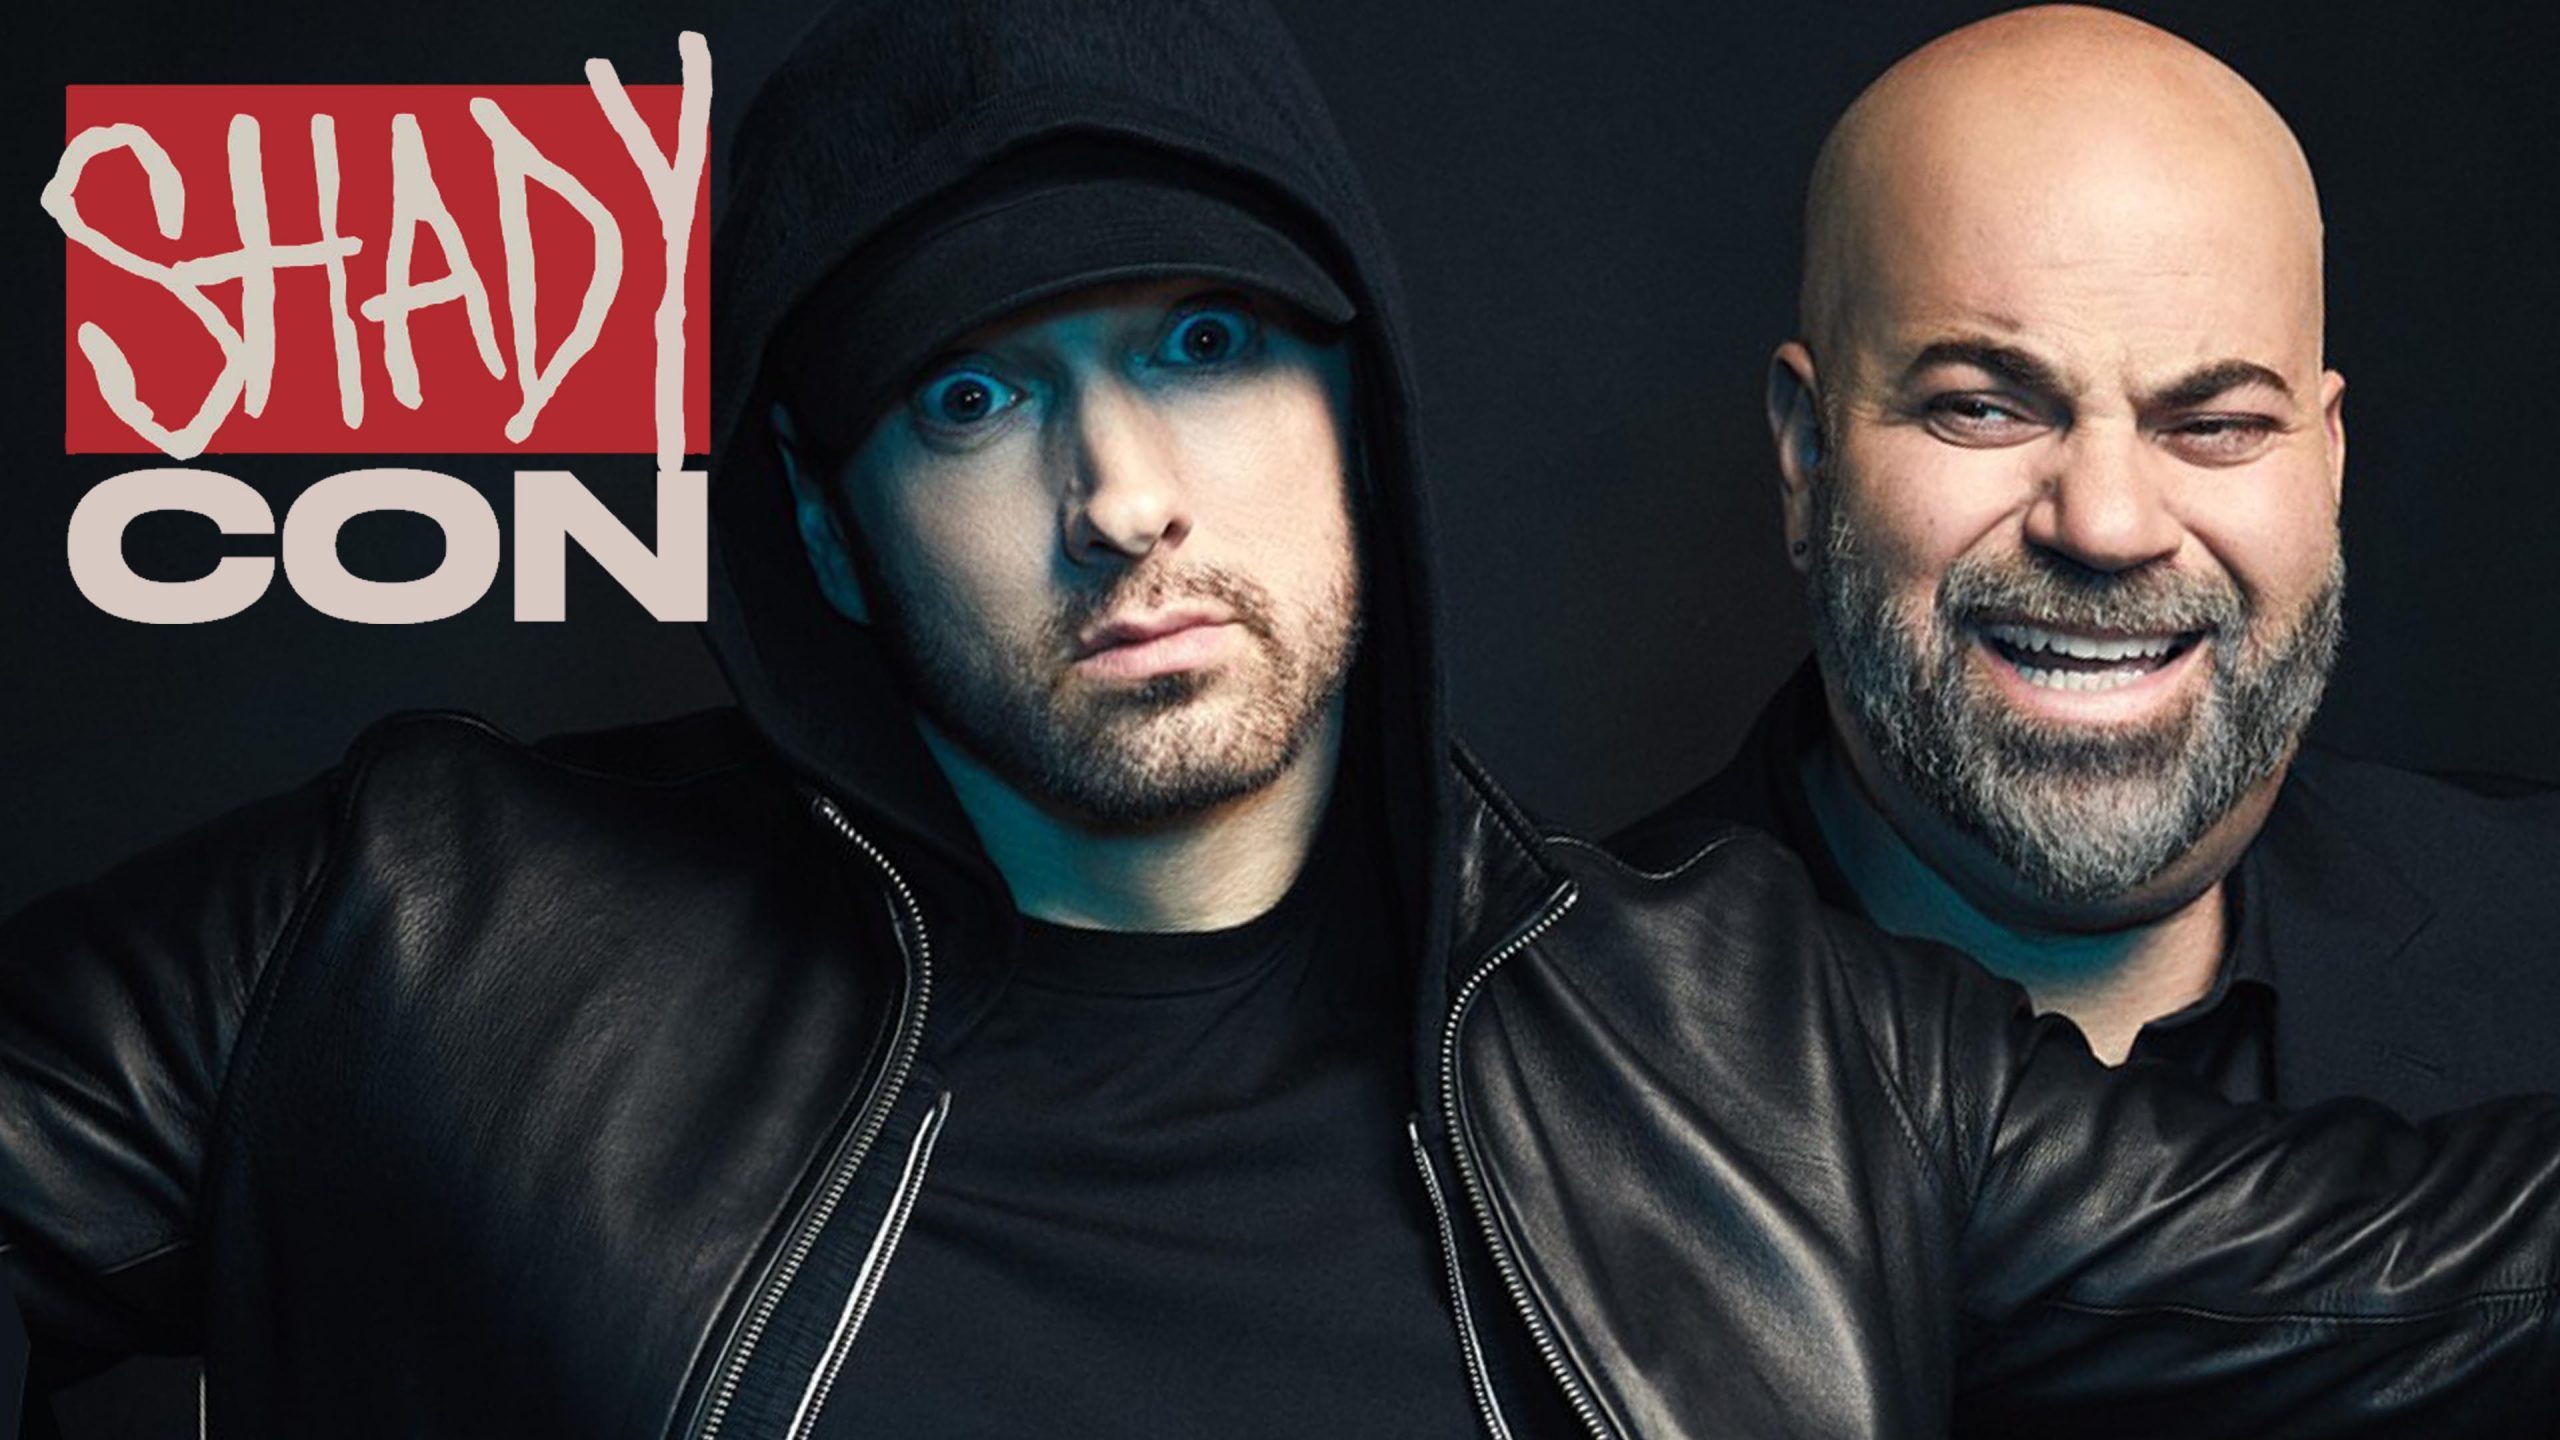 What to expect from Eminem in Sunday? Paul Rosenberg Talks Eminem's Shady Con, NFT & More